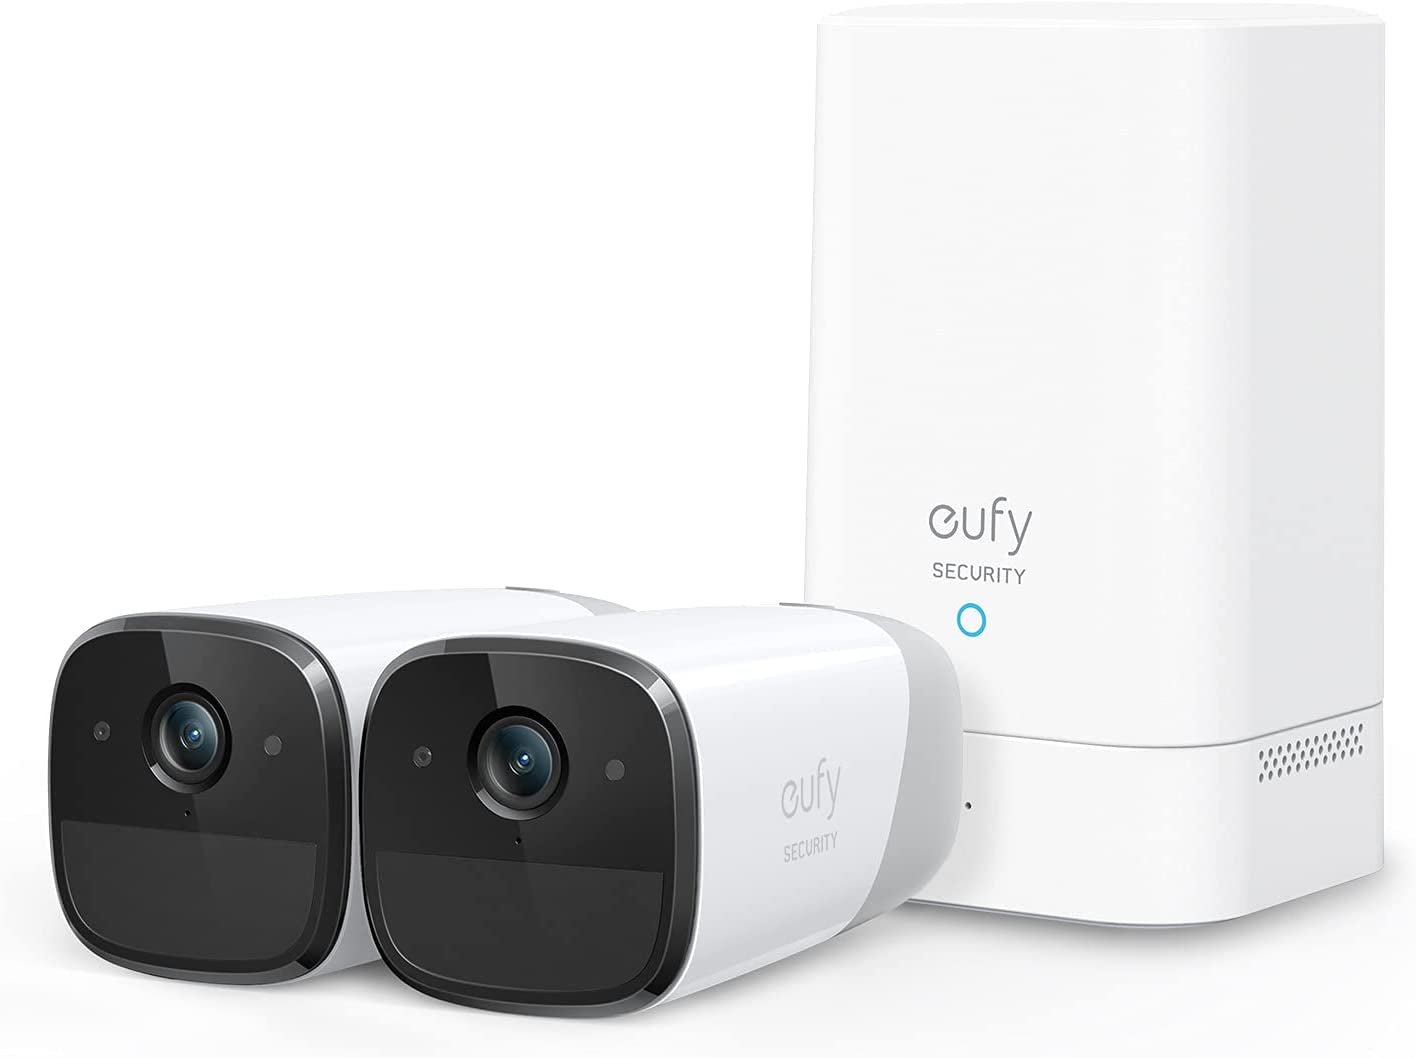 Eufy, Eufy Security by Anker Eufycam 2 Pro Wireless Home Security Camera System, 365-Day Battery Life, Homekit Compatibility, 2K Resolution, IP67 Weatherproof, Night Vision, 2-Cam Kit